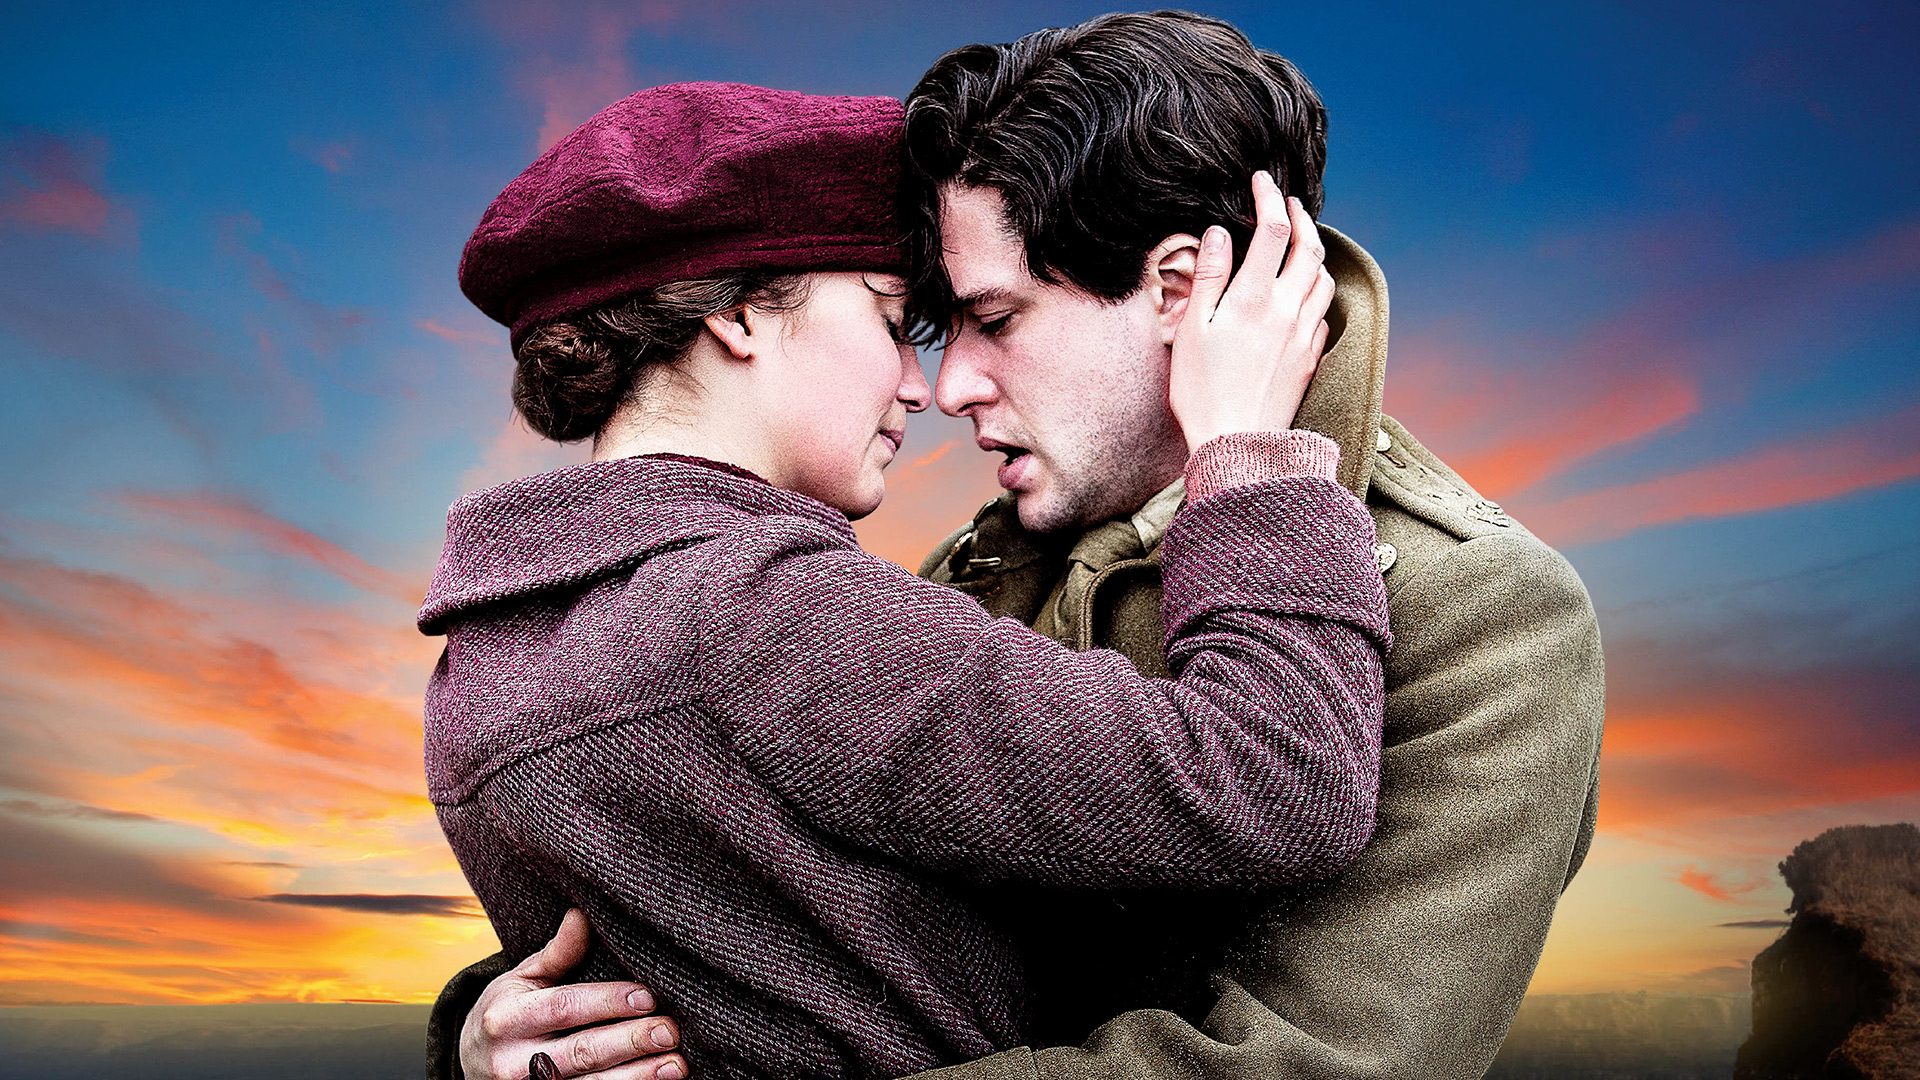 Wallpaper Couple from movie, Testament Of Youth, 2014 Movie